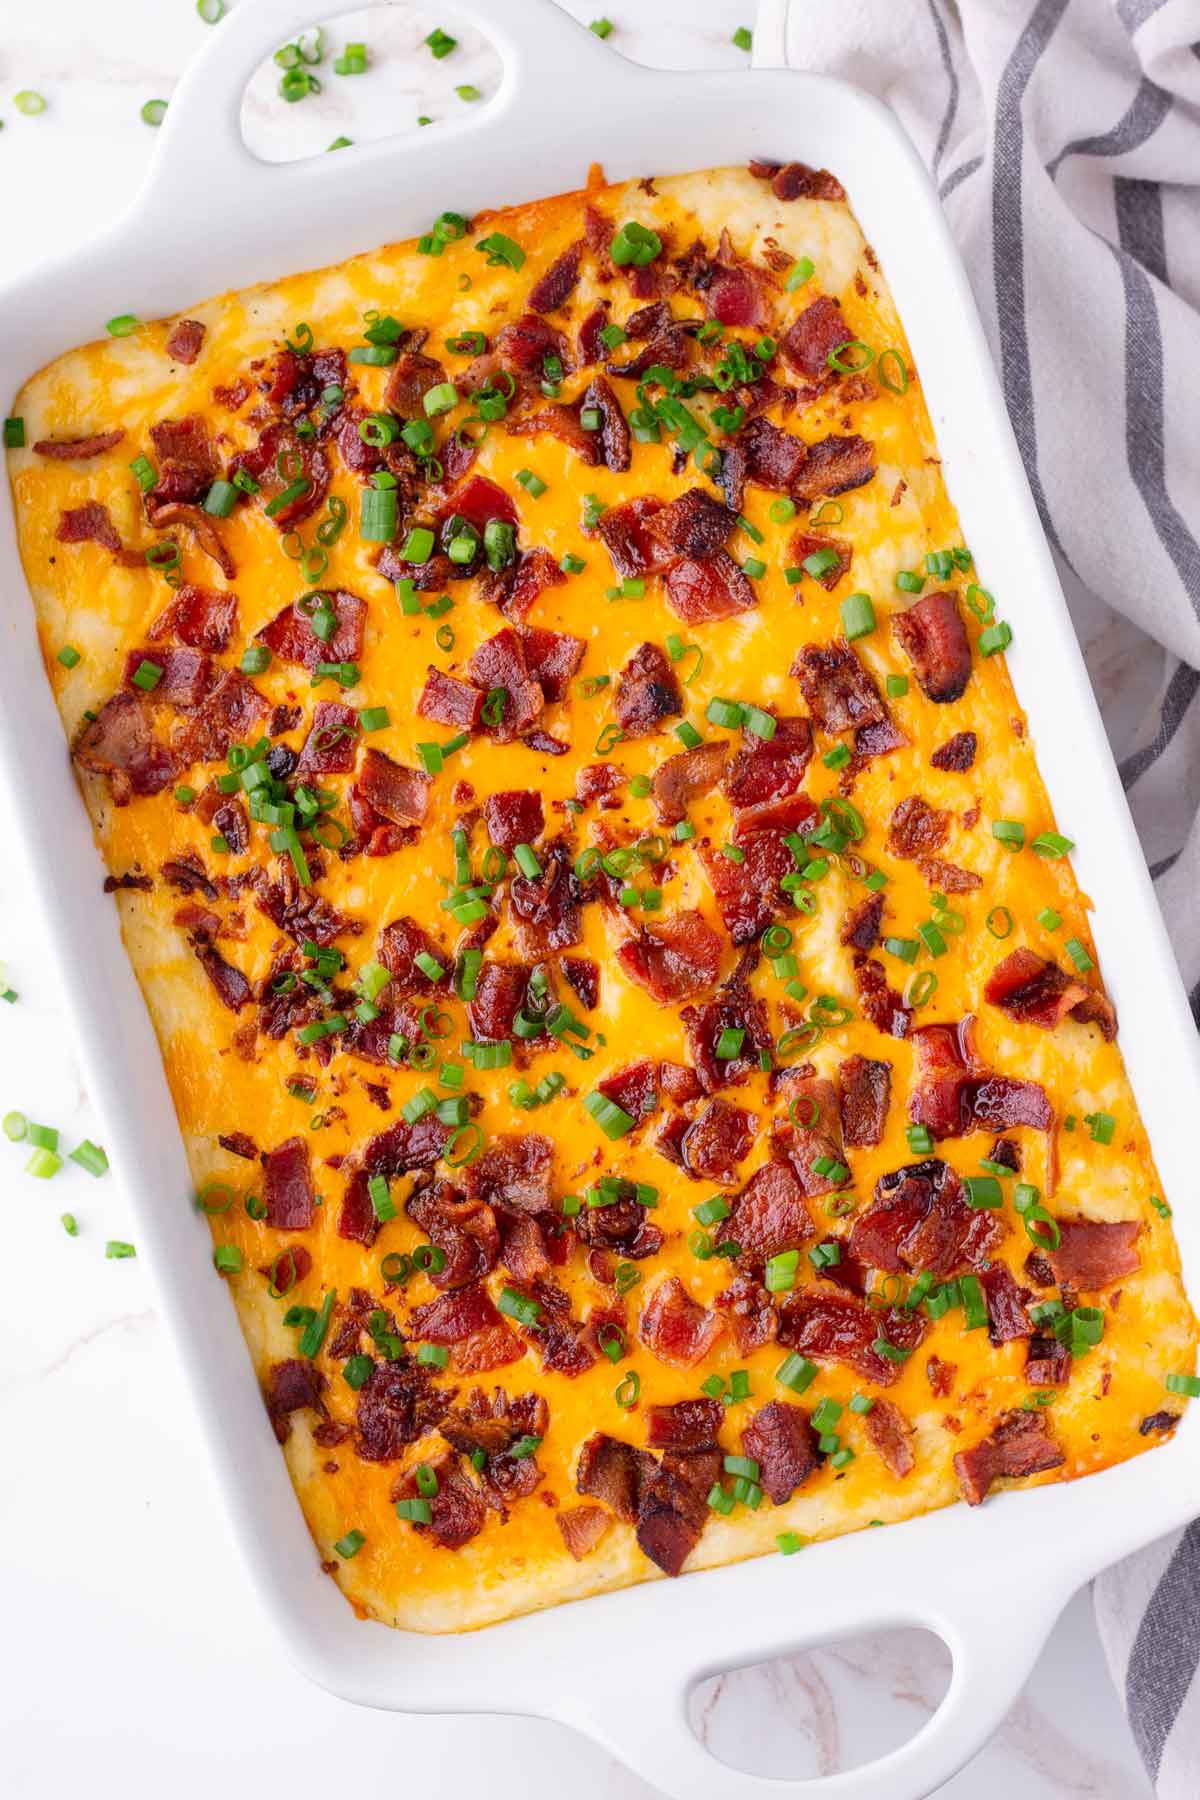 mashed potatoes topped with cheese, bacon, scallions